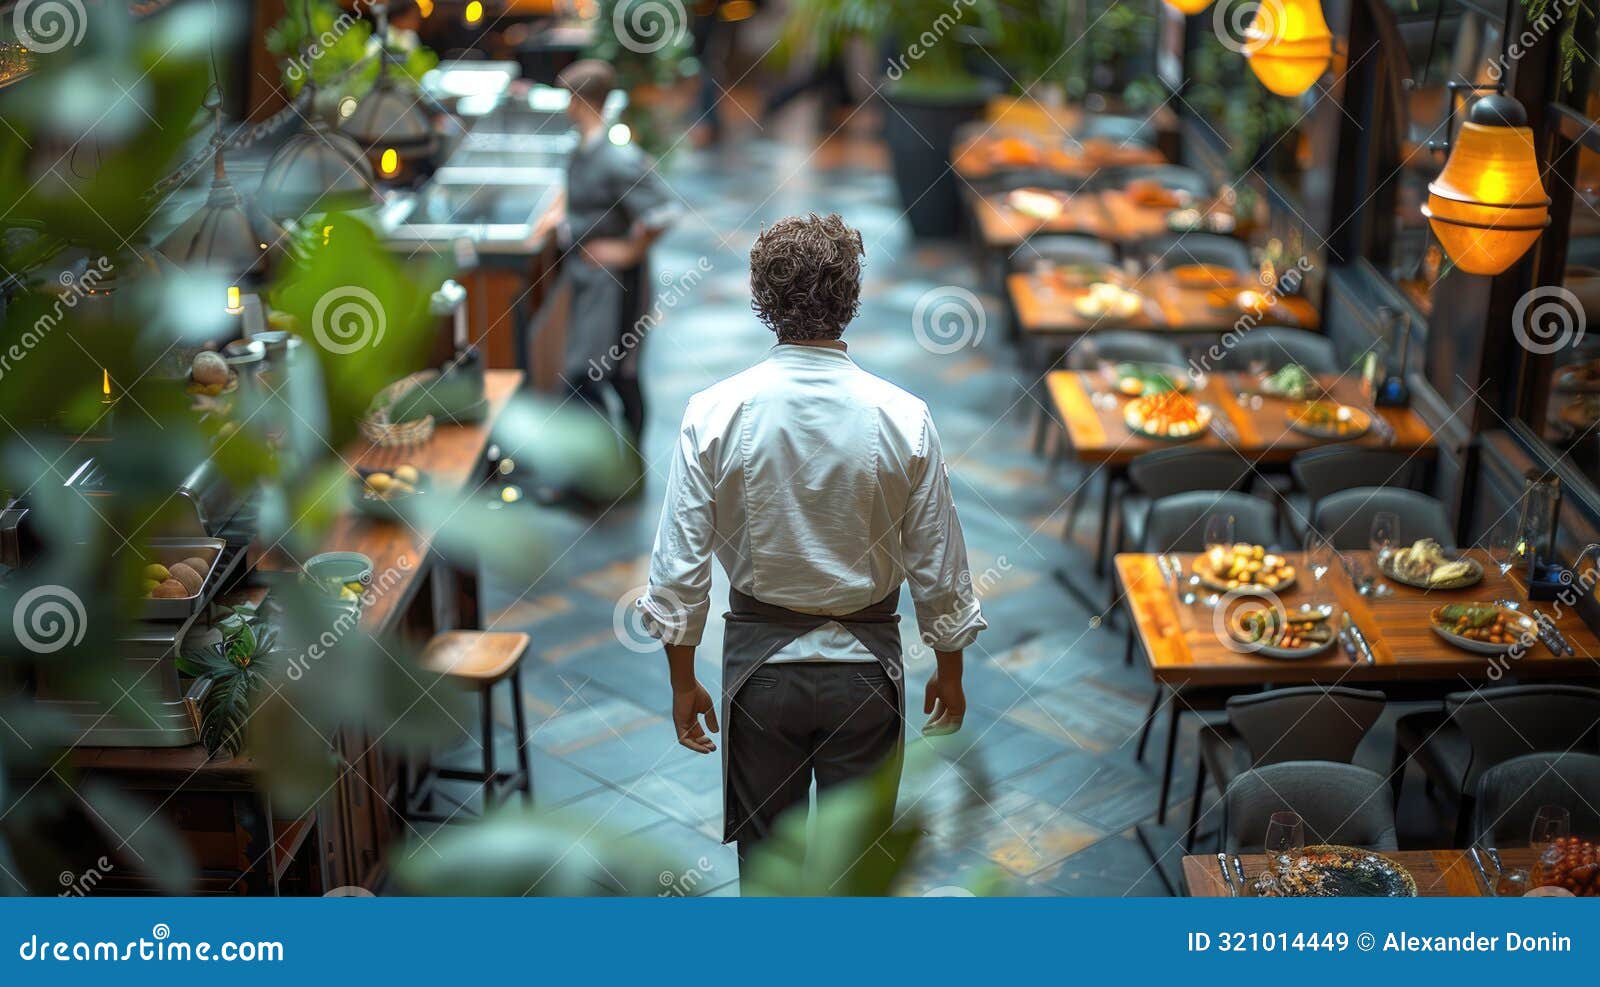 elegant restaurant ambiance with professional waitstaff in luxurious setting